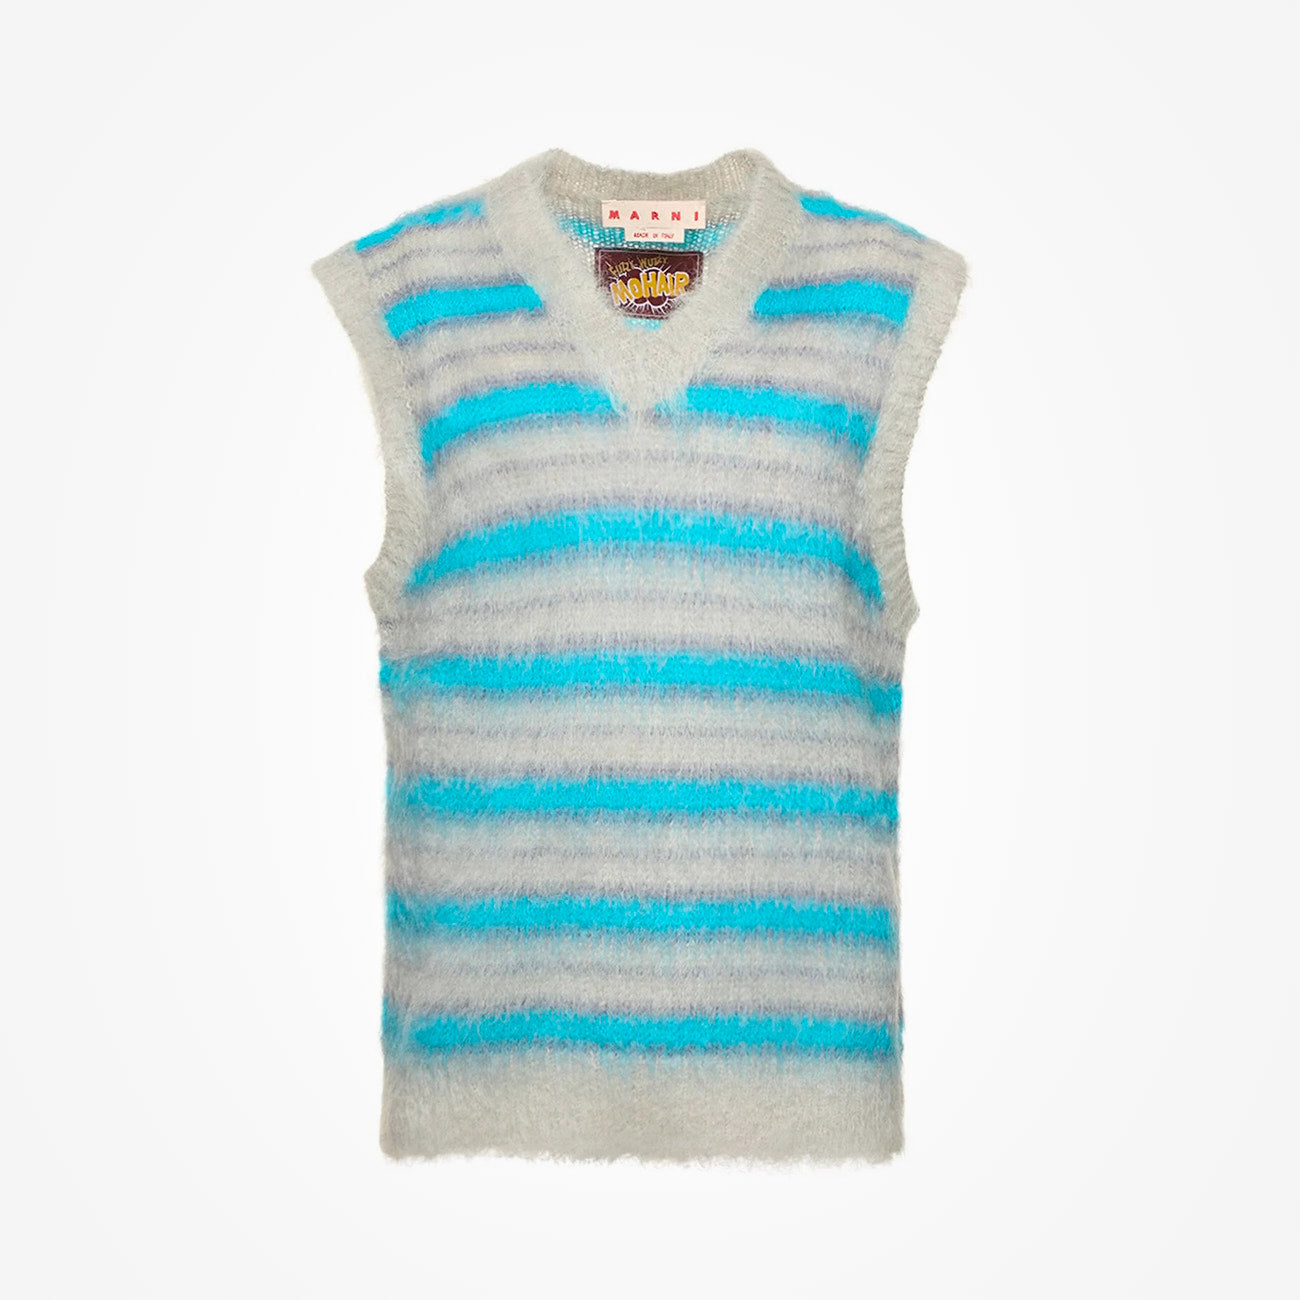 Maille Marni V-Neck Sans Manches Mohair